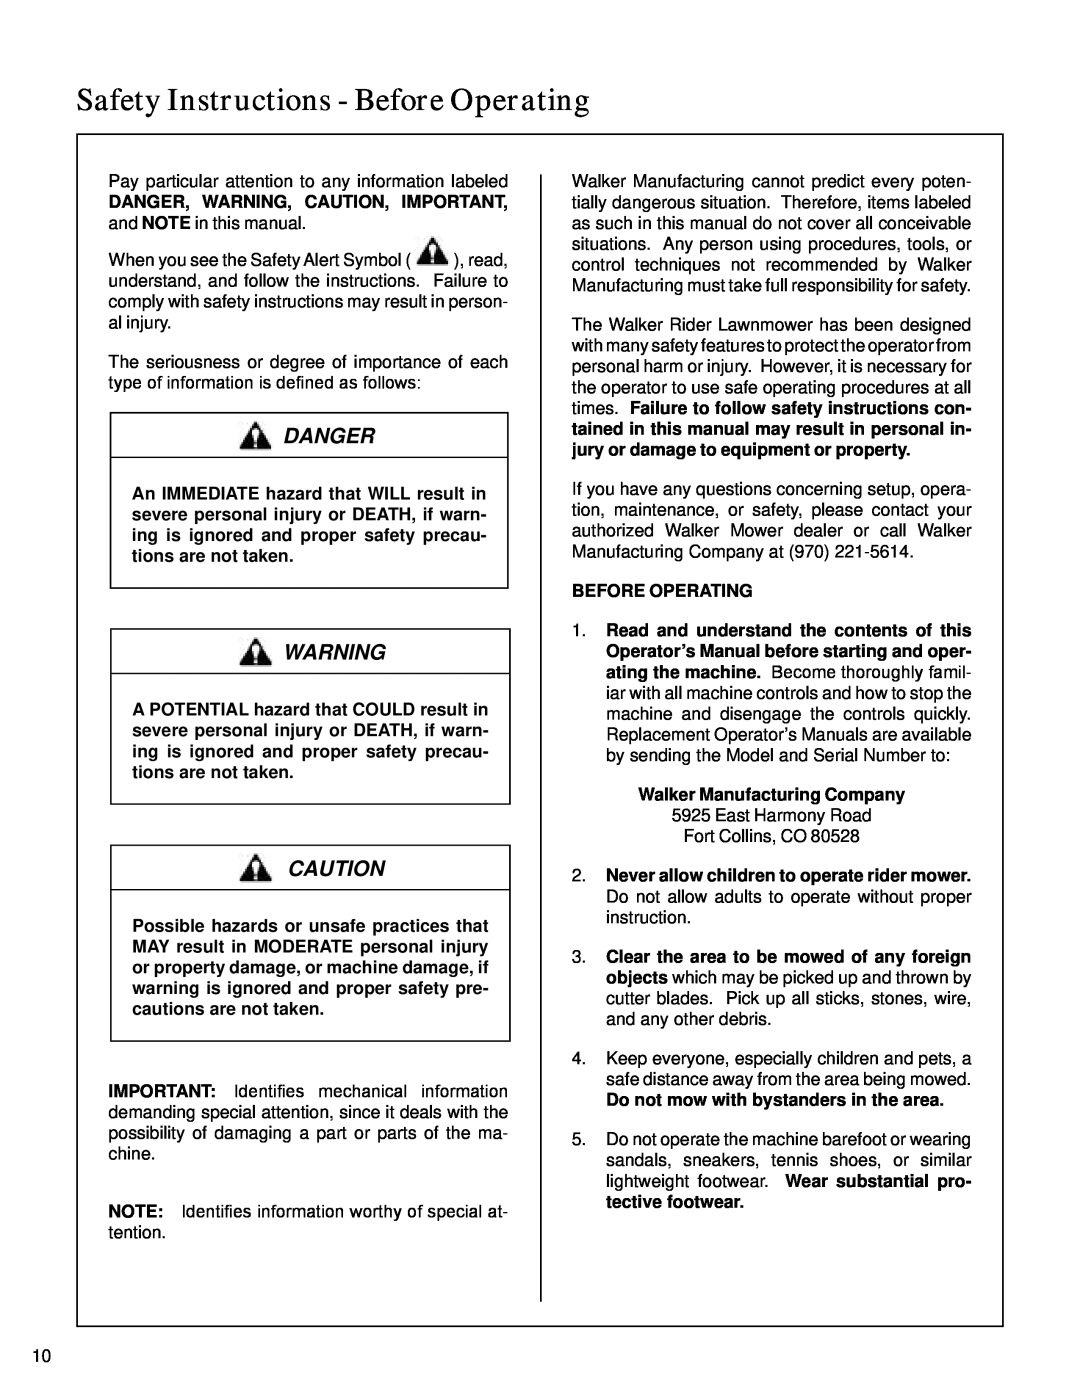 Walker S14 manual Safety Instructions - Before Operating, Danger, Do not mow with bystanders in the area 